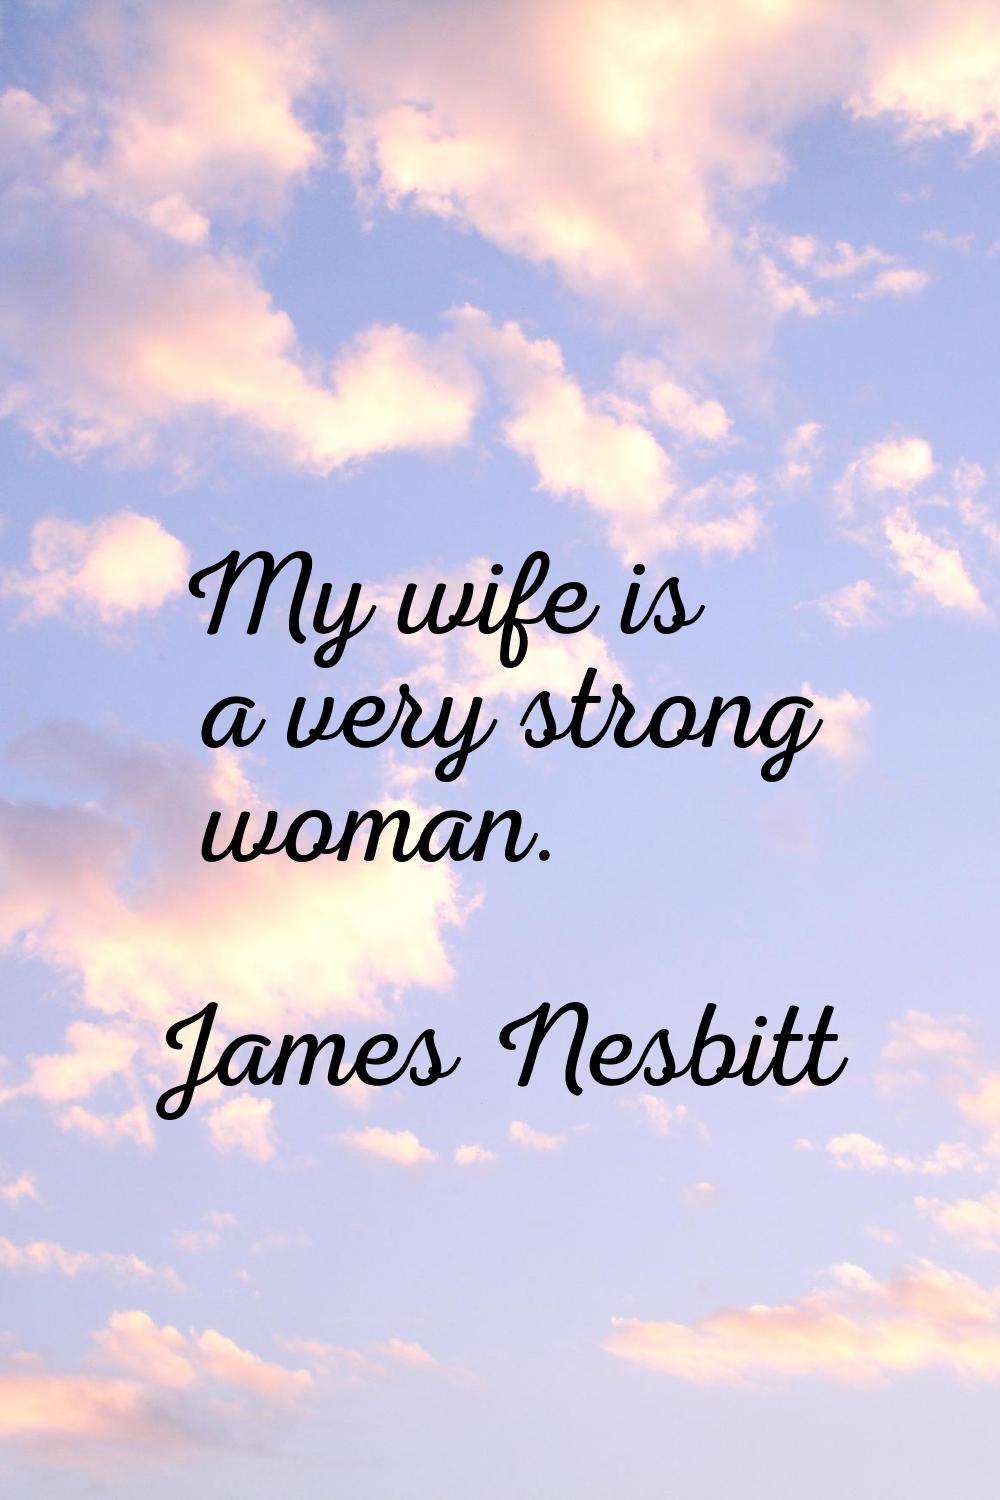 My wife is a very strong woman.